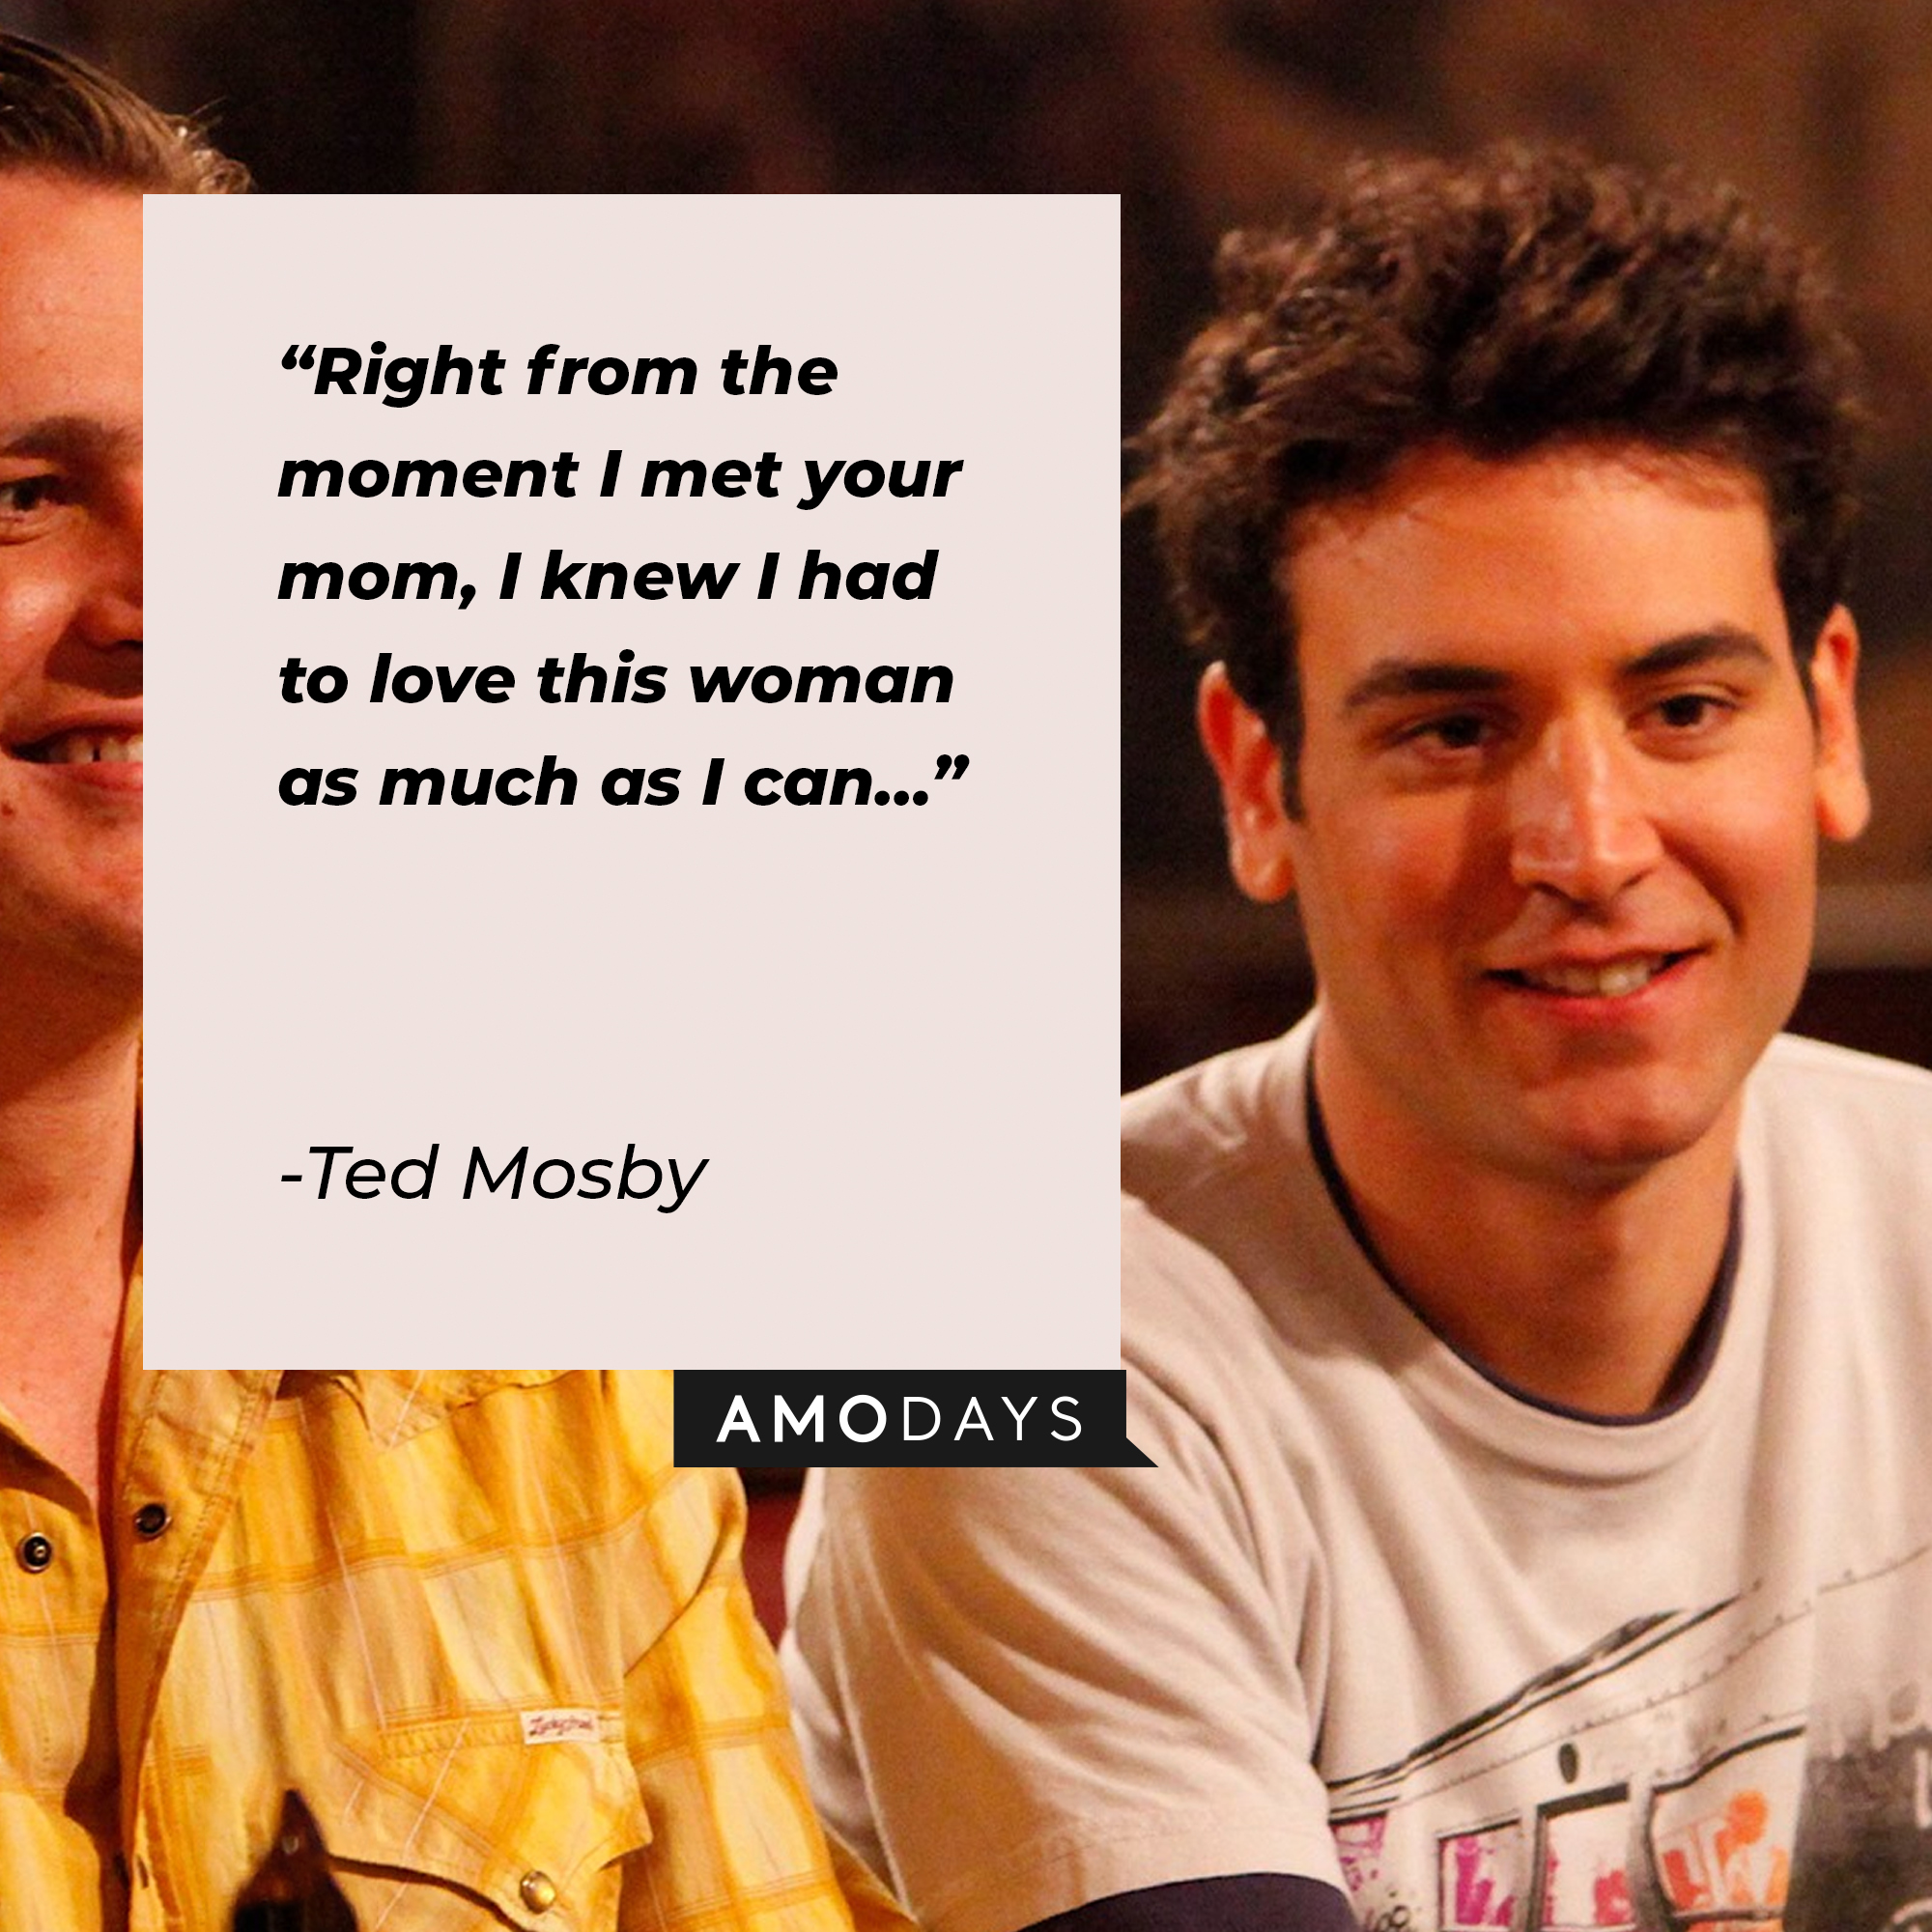 A picture of Ted Mosby with his quote, “Right from the moment I met your mom, I knew I had to love this woman as much as I can…” | Source: facebook.com/OfficialHowIMetYourMother